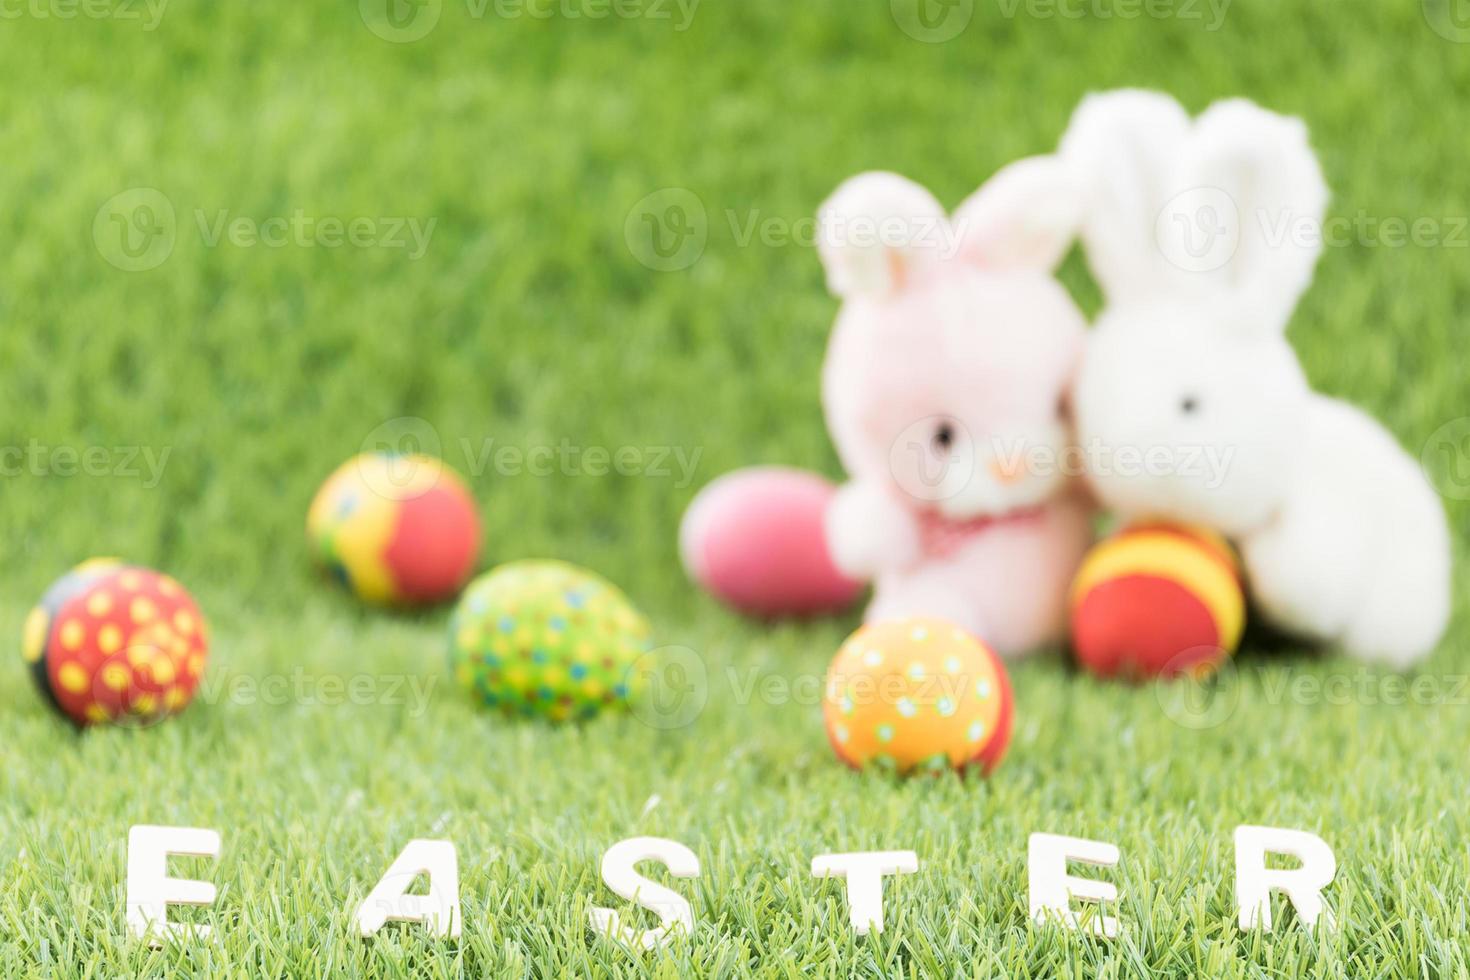 Bunny toys and Easter eggs with text photo